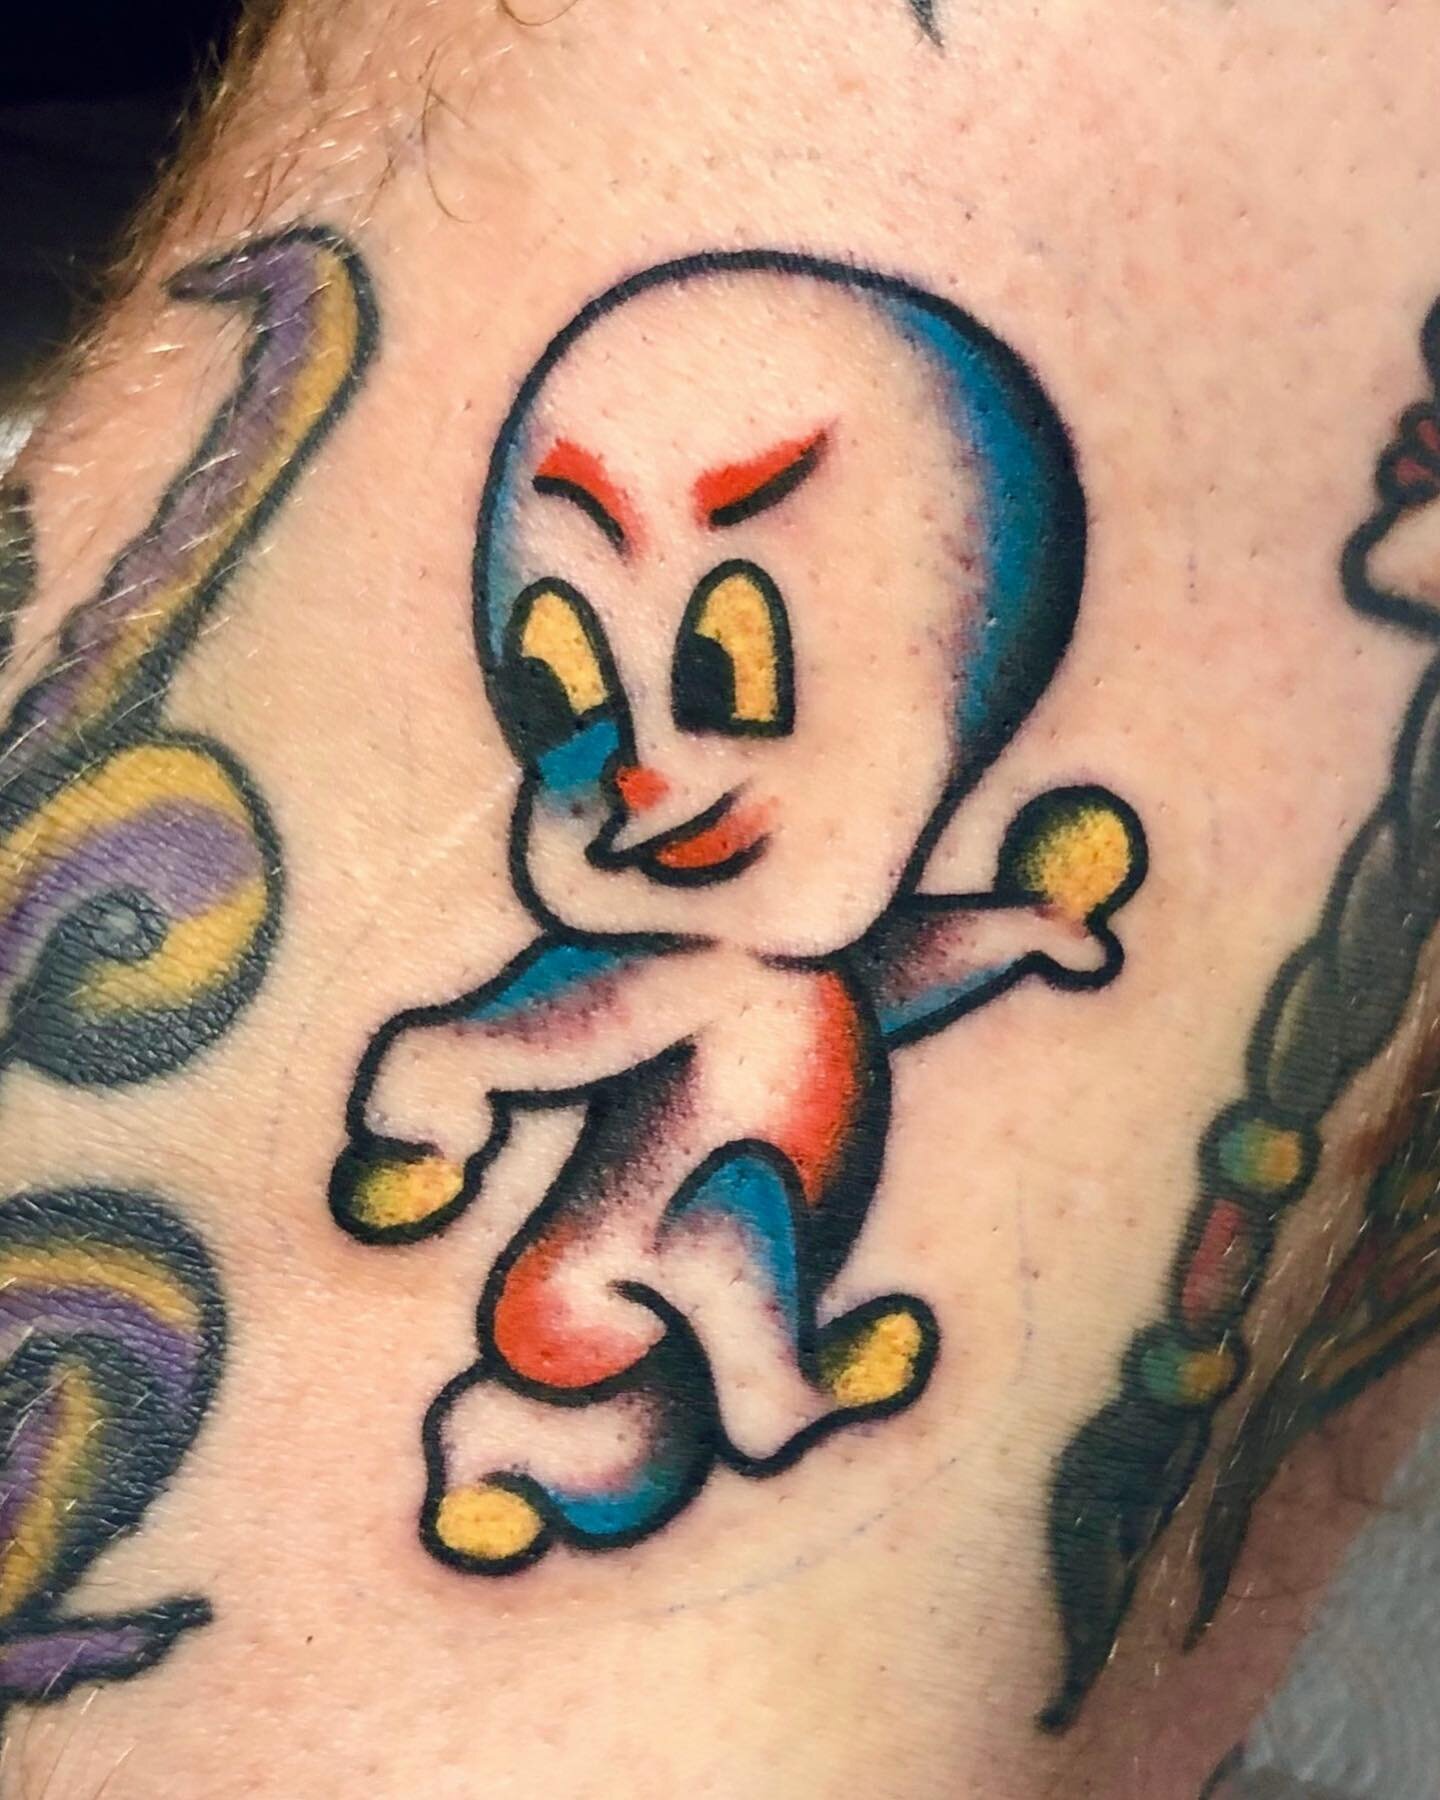 👻 
Casper for @adaoblando 
Muito obrigado amigo 
.
Made 2 weeks ago @ftwtattooco 
🙌
I have time available this week for flash or custom @victorytattooing 
DM for booking or stop by the shop
.
.
.
.
.
.
.
.
.
.
.
#tattoo #tatuagem #traditionaltattoo